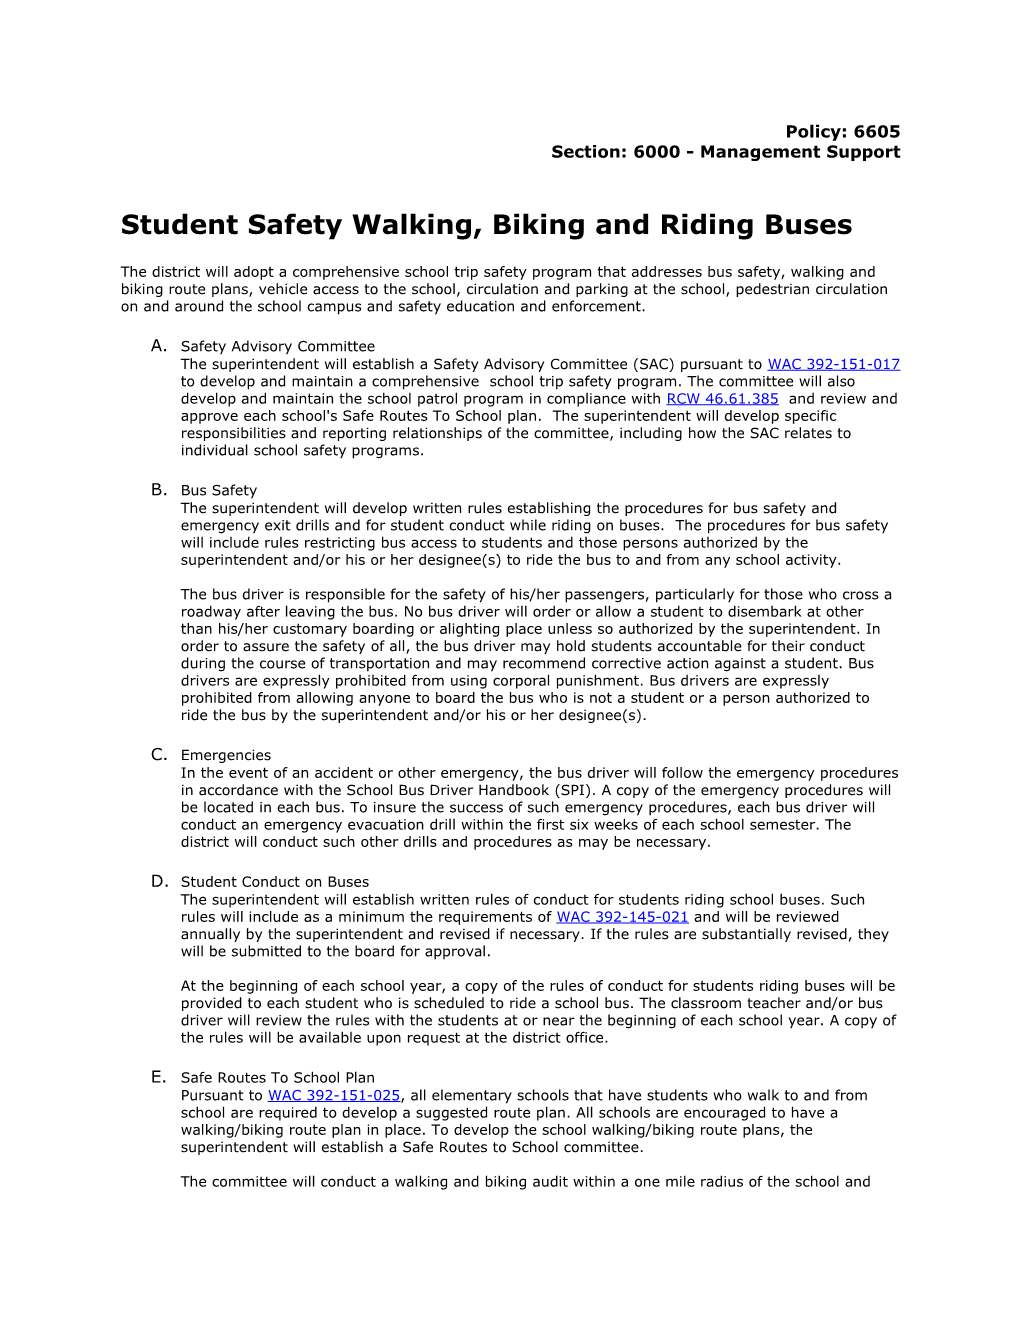 Student Safety Walking, Biking and Riding Buses